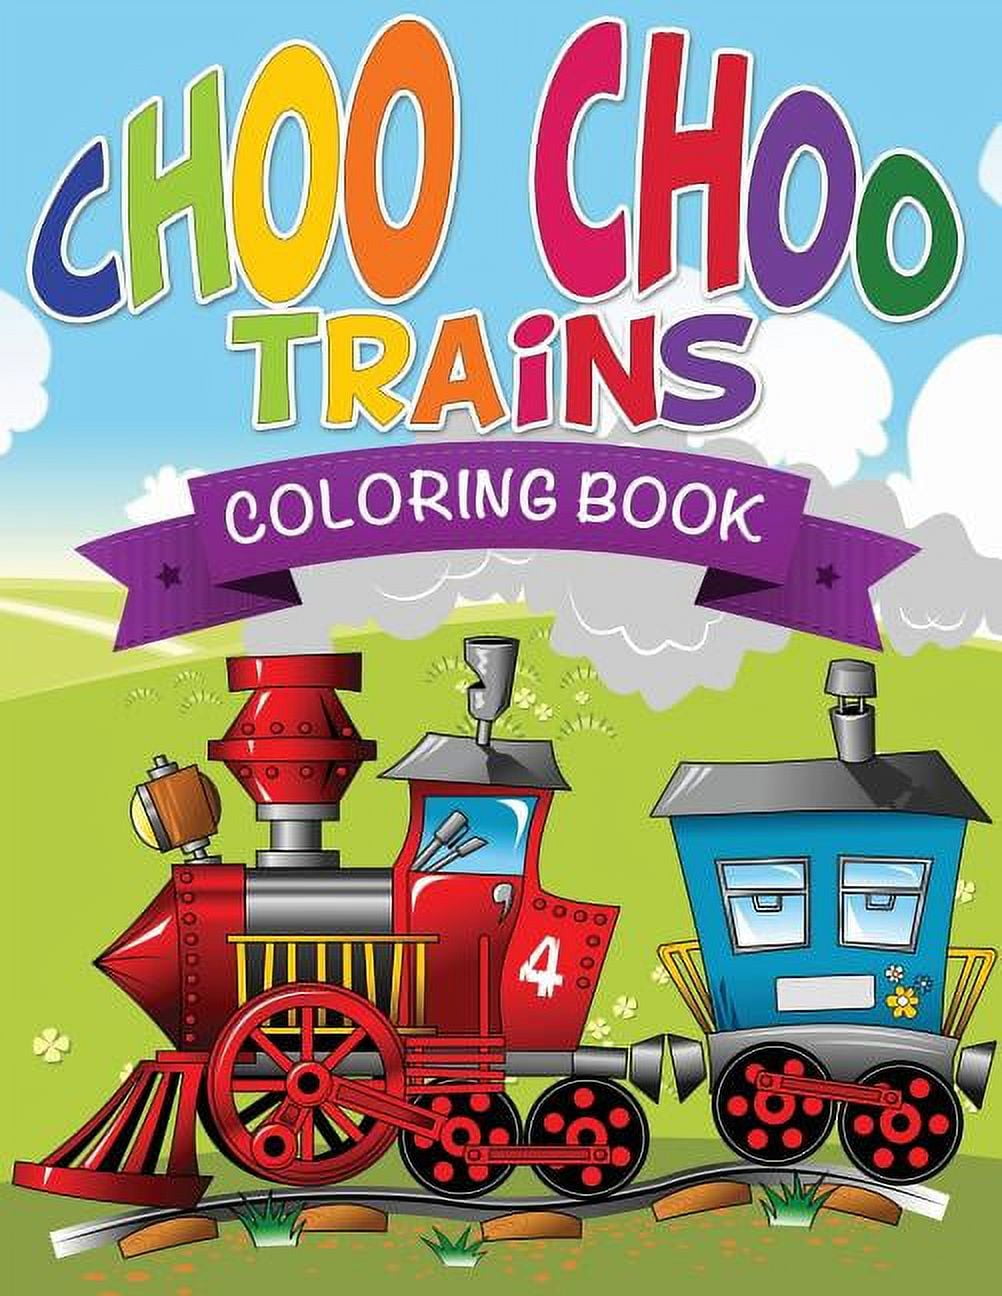 Trains Coloring Book: A Fun and Relaxation Colouring Book for Adult & Kids Stress Relieving Designs! [Book]